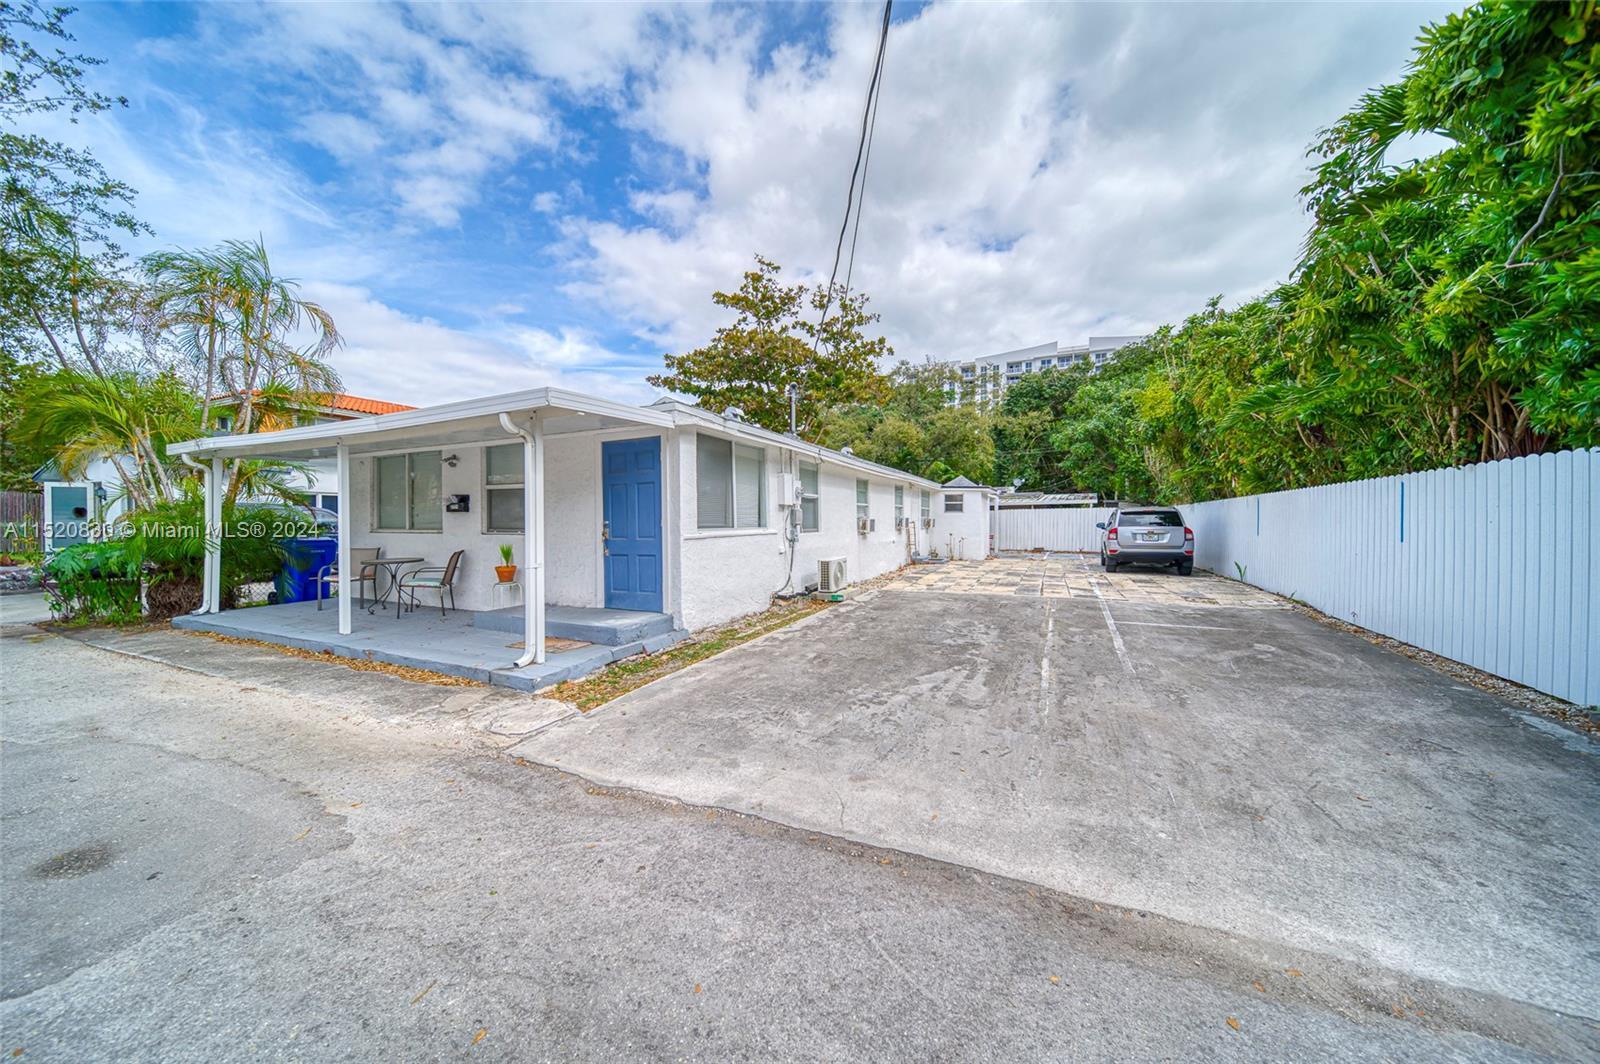 Turn key opportunity centrally located between Coral Gables and Coconut Grove. This investment is ve